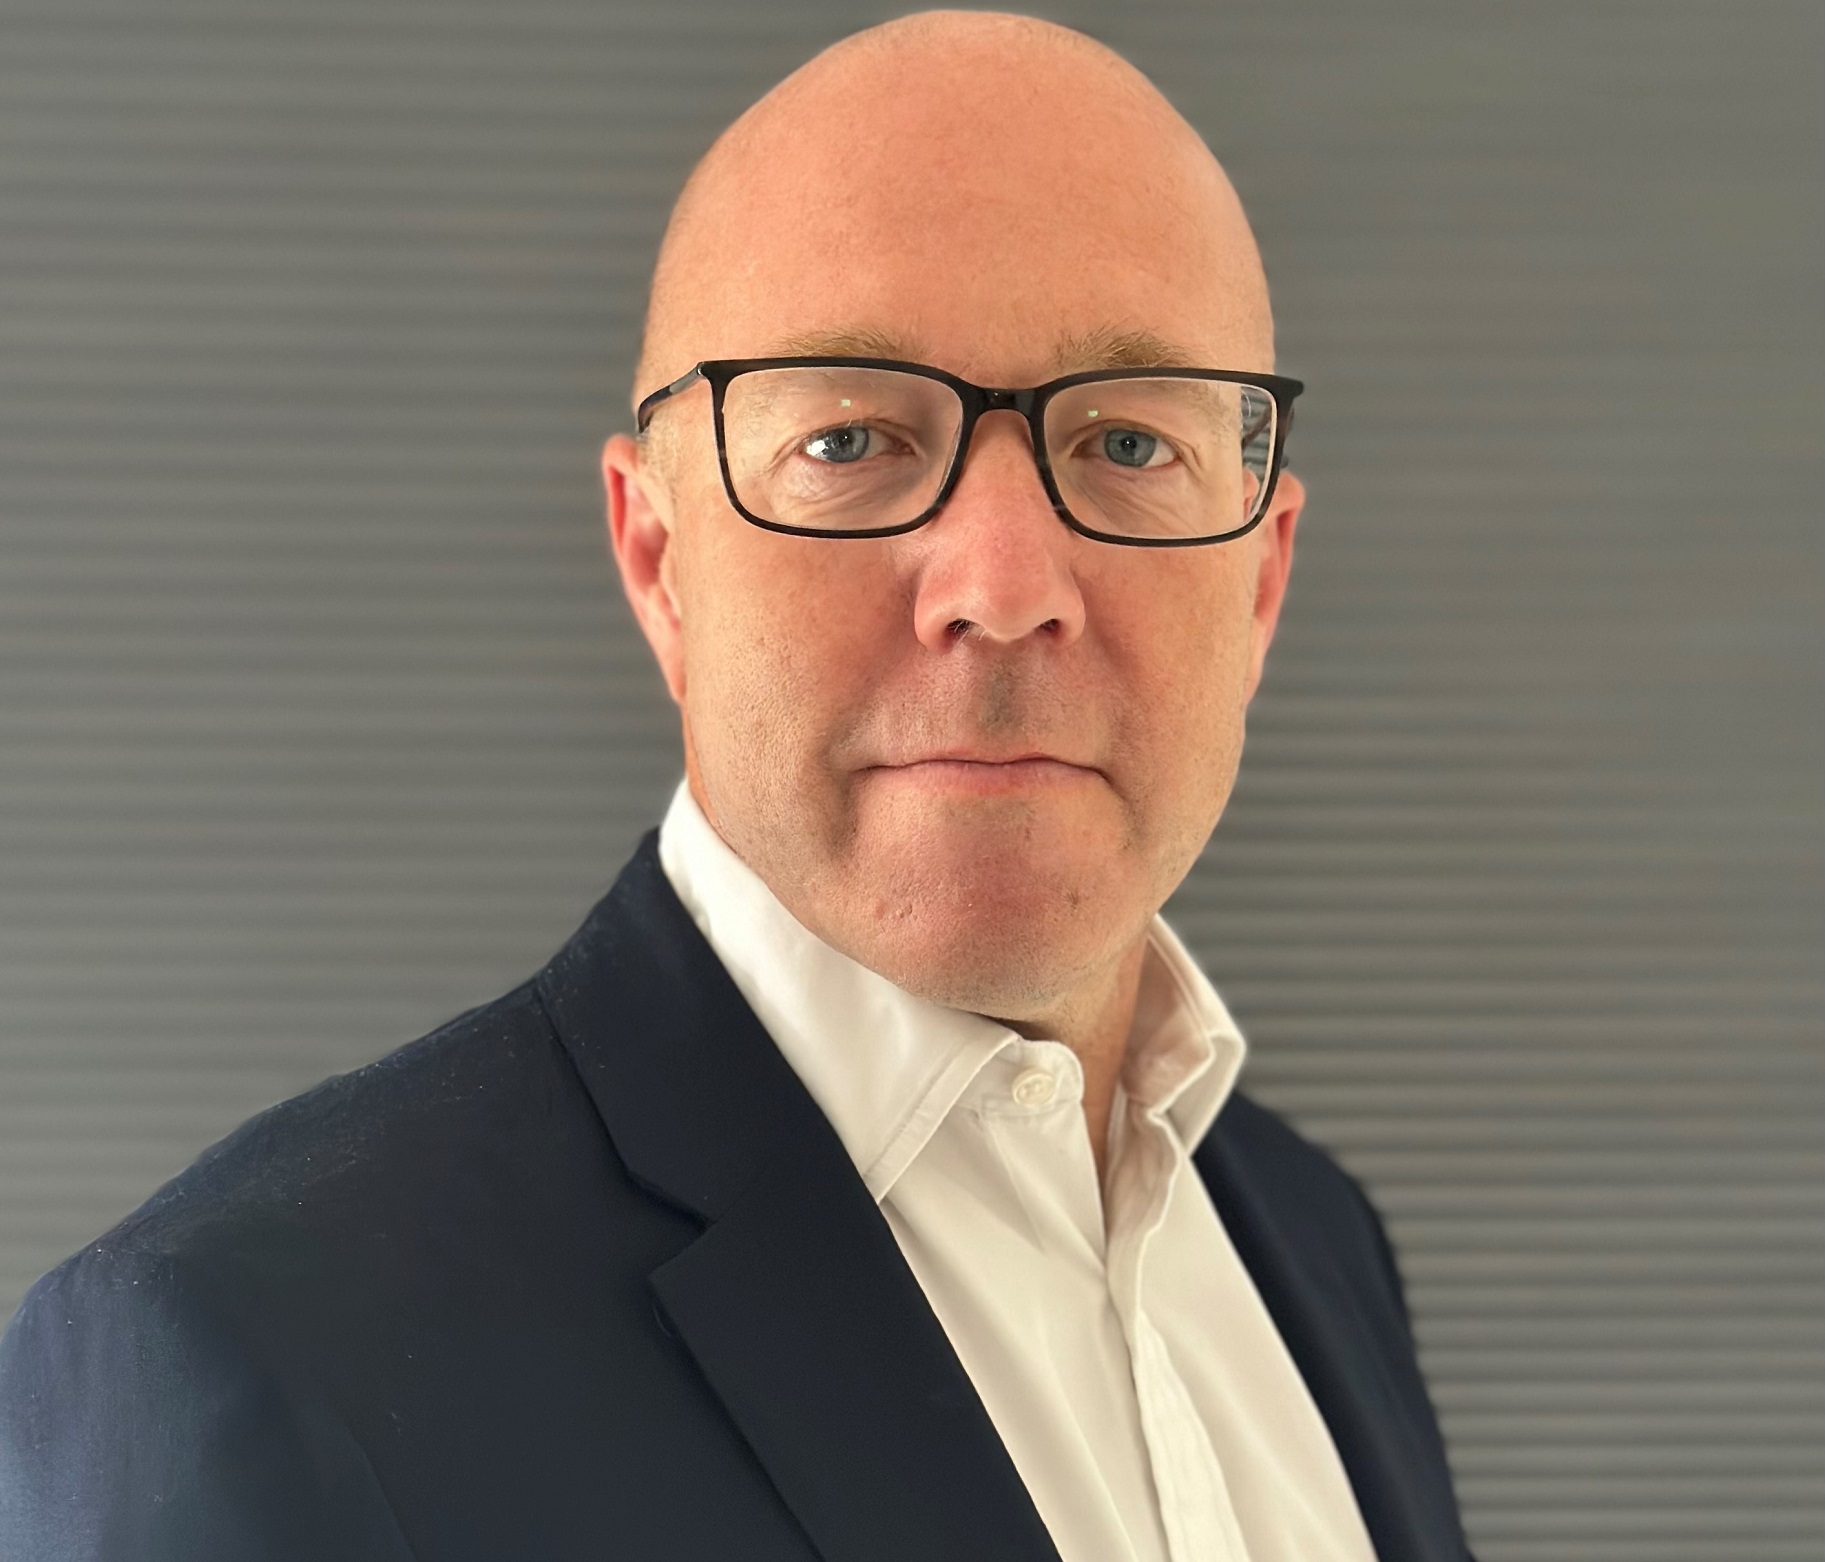 New chief financial officer at Tilbury Douglas